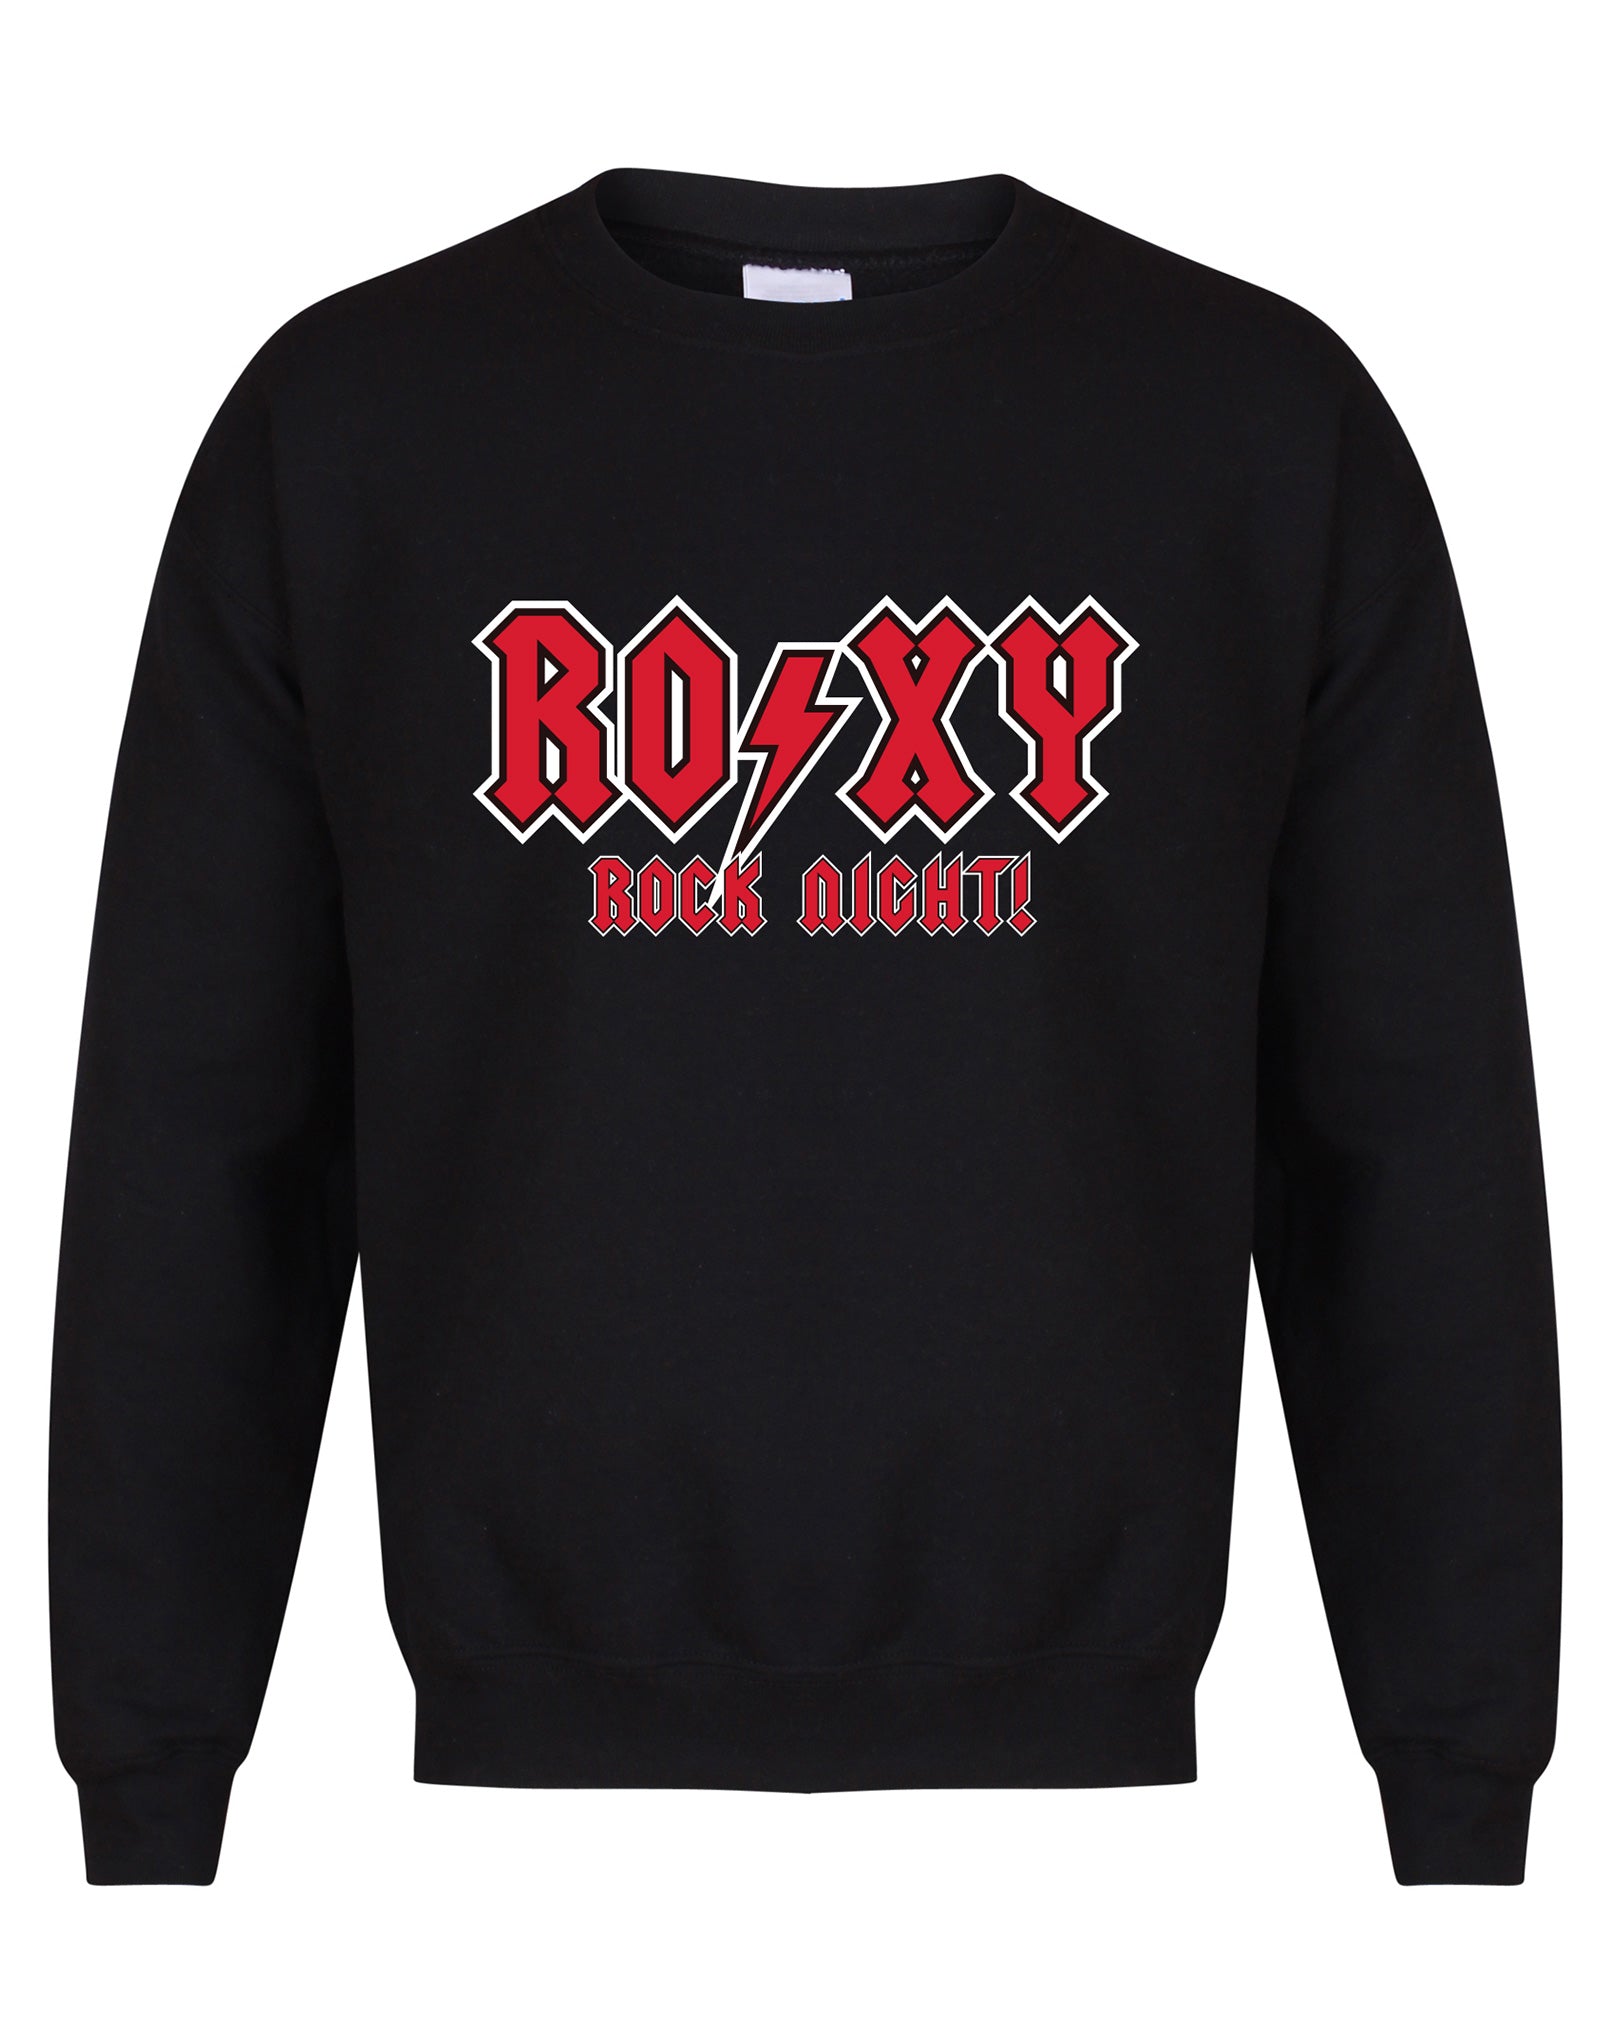 Roxy Rock Night unisex fit sweatshirt - various colours - Dirty Stop Outs